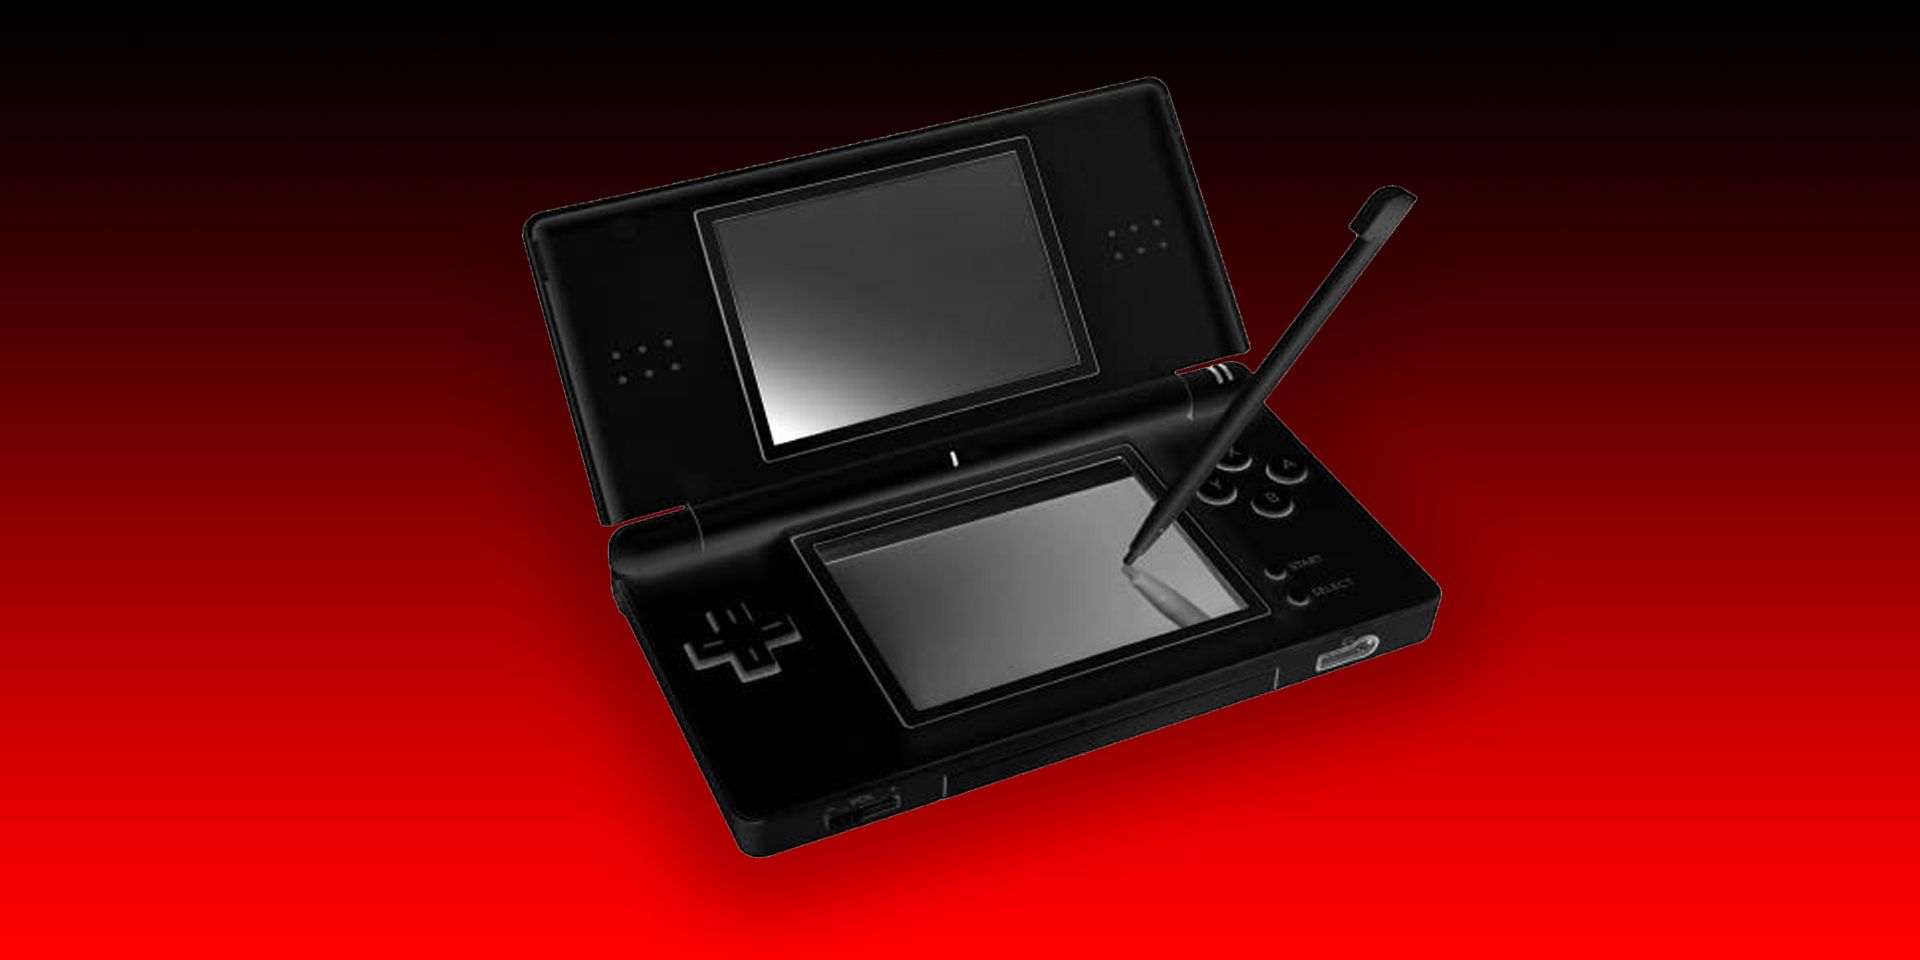 A Nintendo DS Lite system on a black and red background.